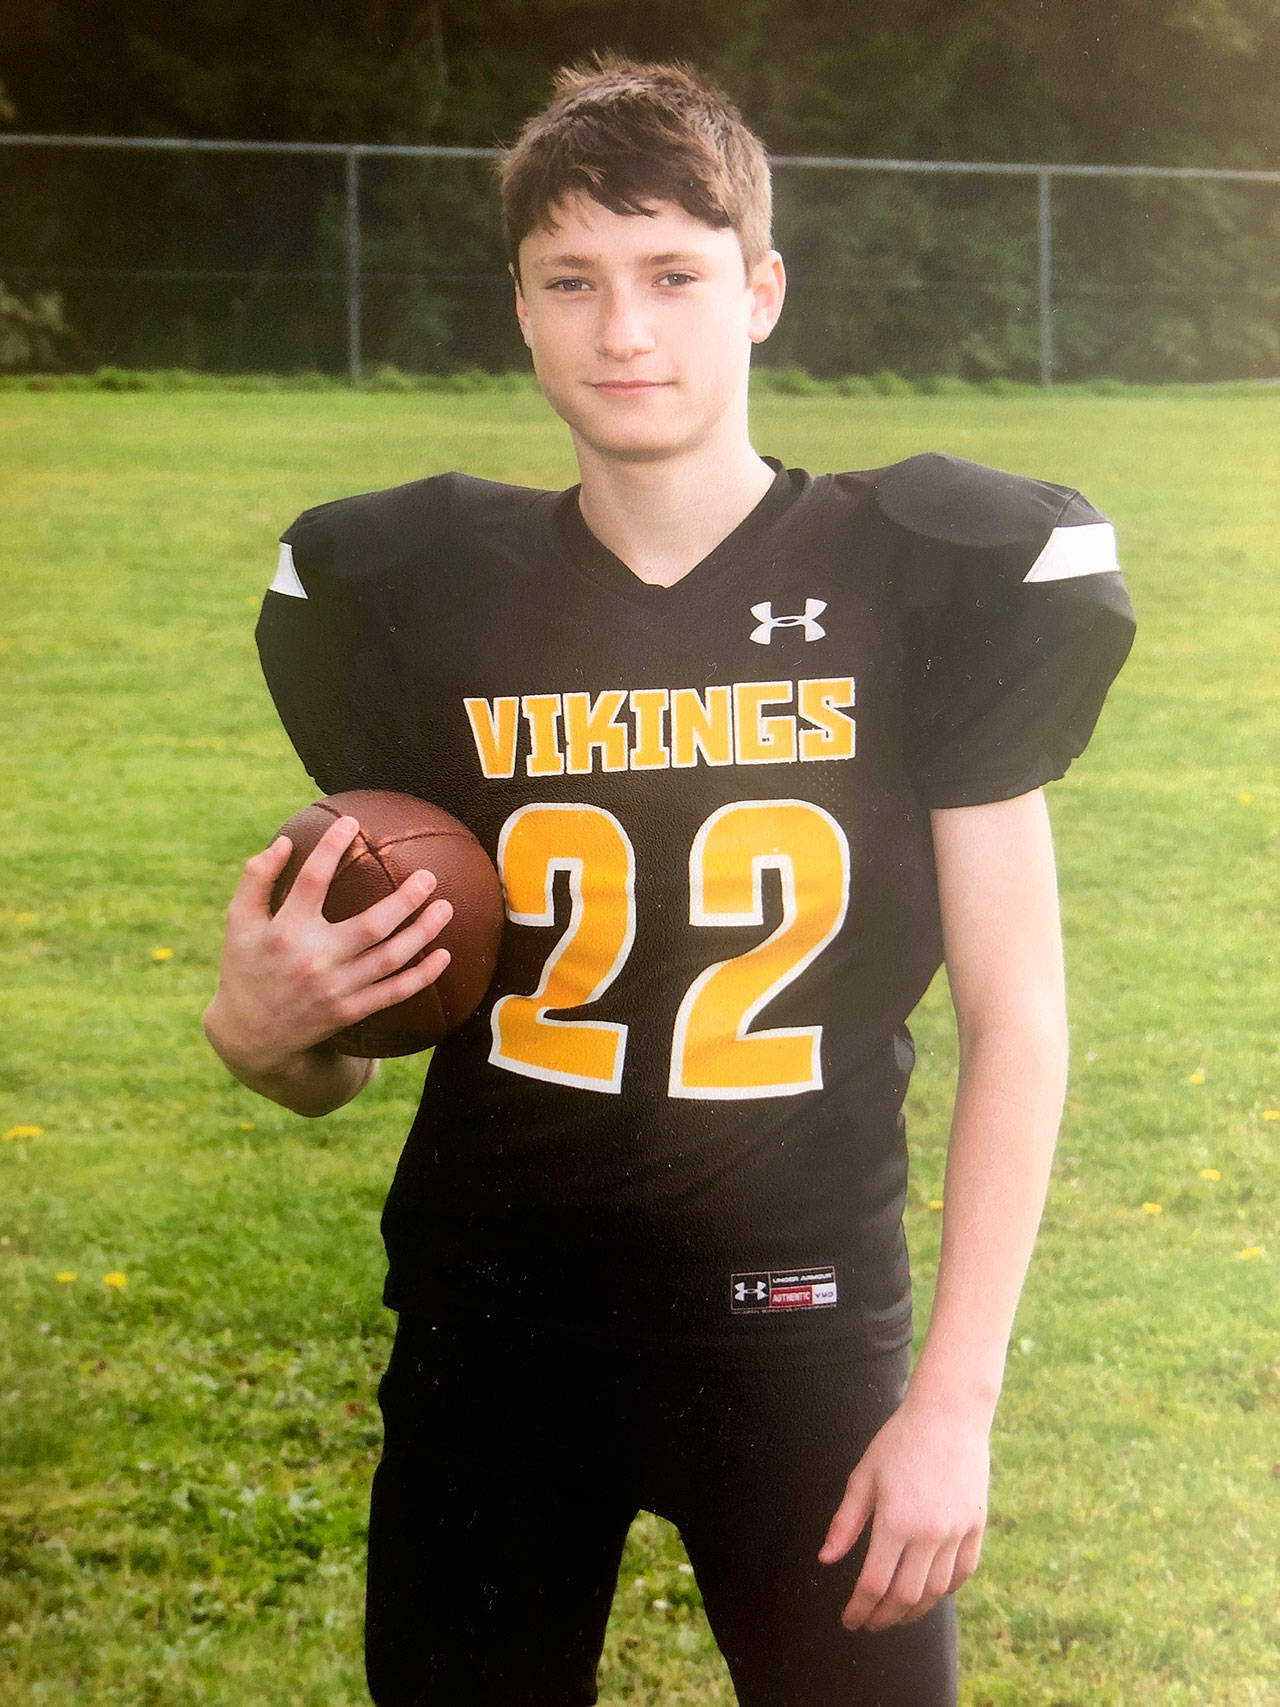 Photo courtesy of Payne’s family                                14-year-old Ryan Payne died Tuesday morning (May 28) after nearly drowning at Magnuson Park in Lake Washington on Memorial Day.